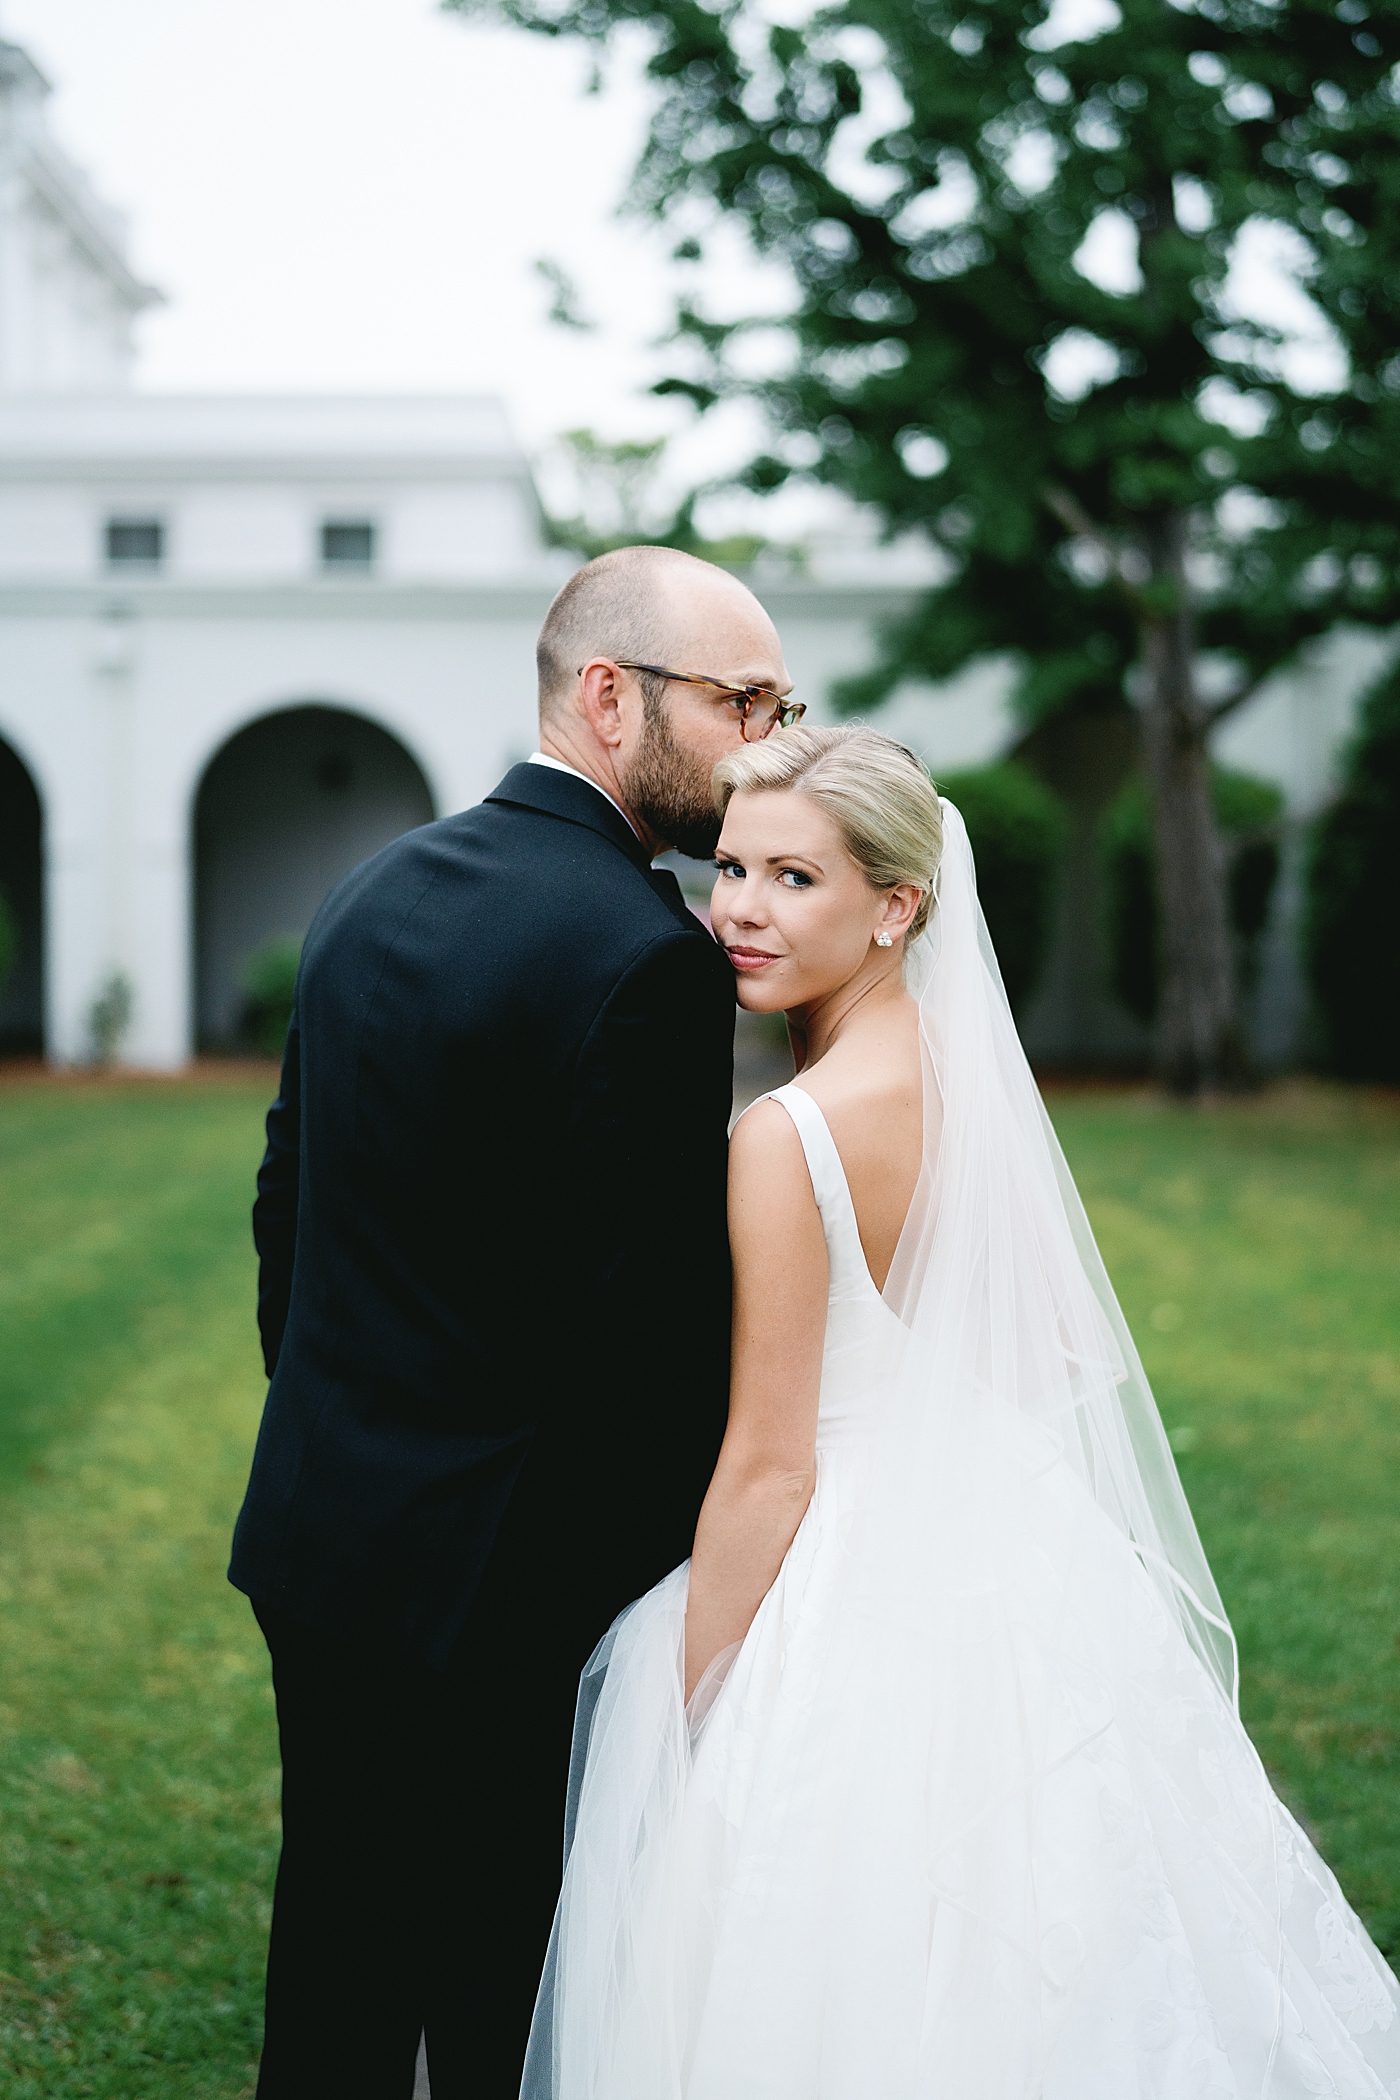 Bride and groom embracing outside of a white church | Image by Annie Laura Photo